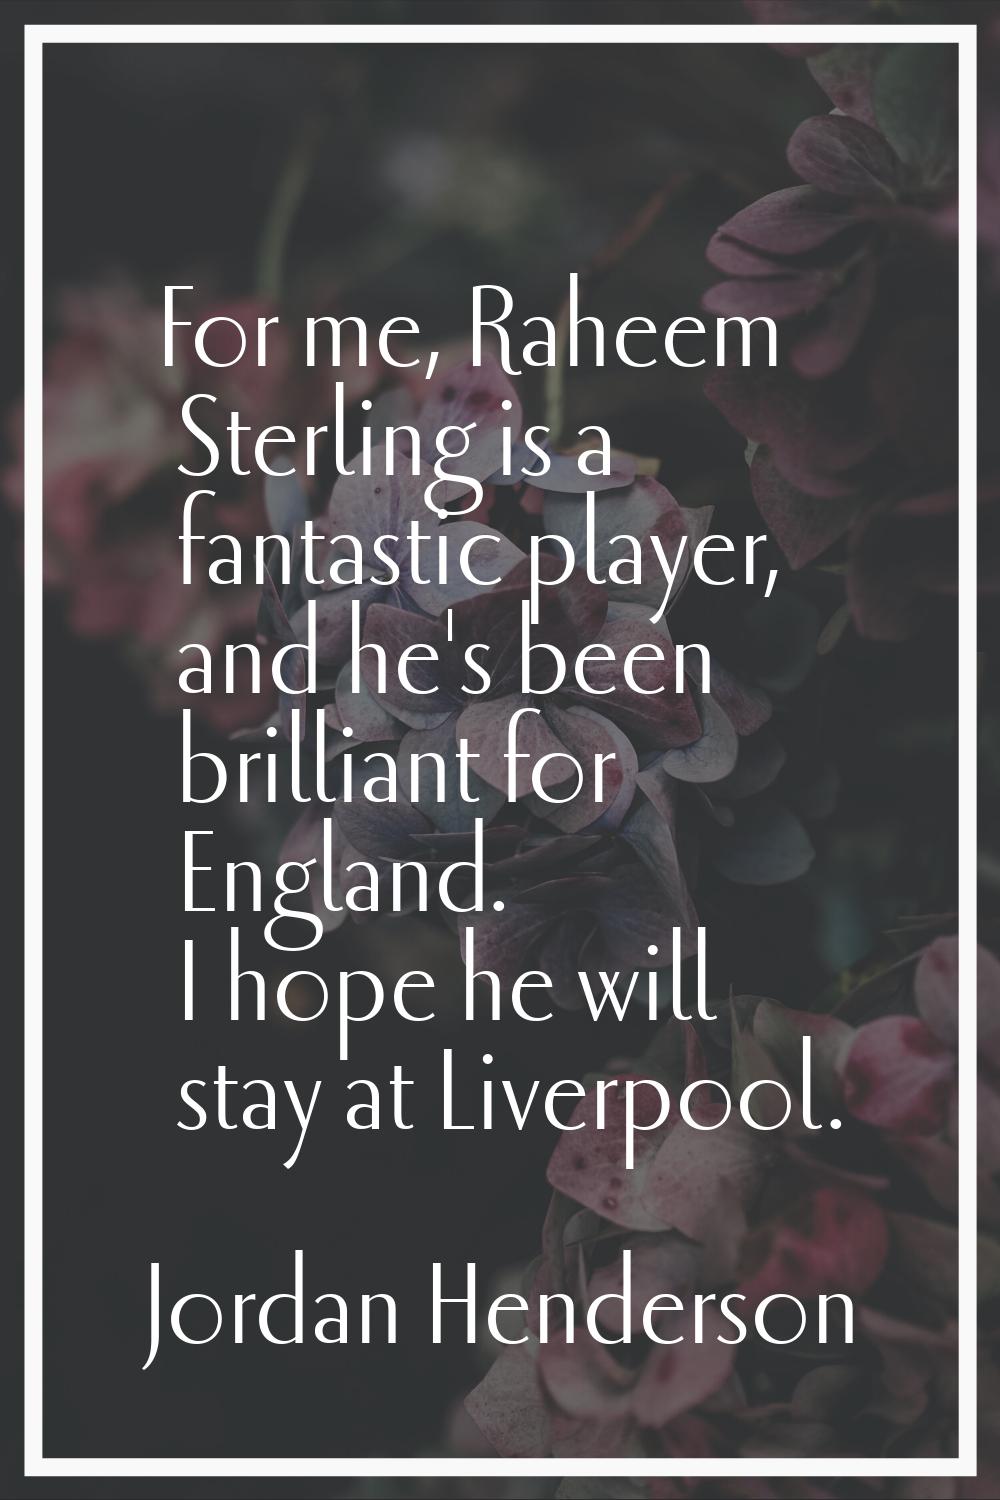 For me, Raheem Sterling is a fantastic player, and he's been brilliant for England. I hope he will 